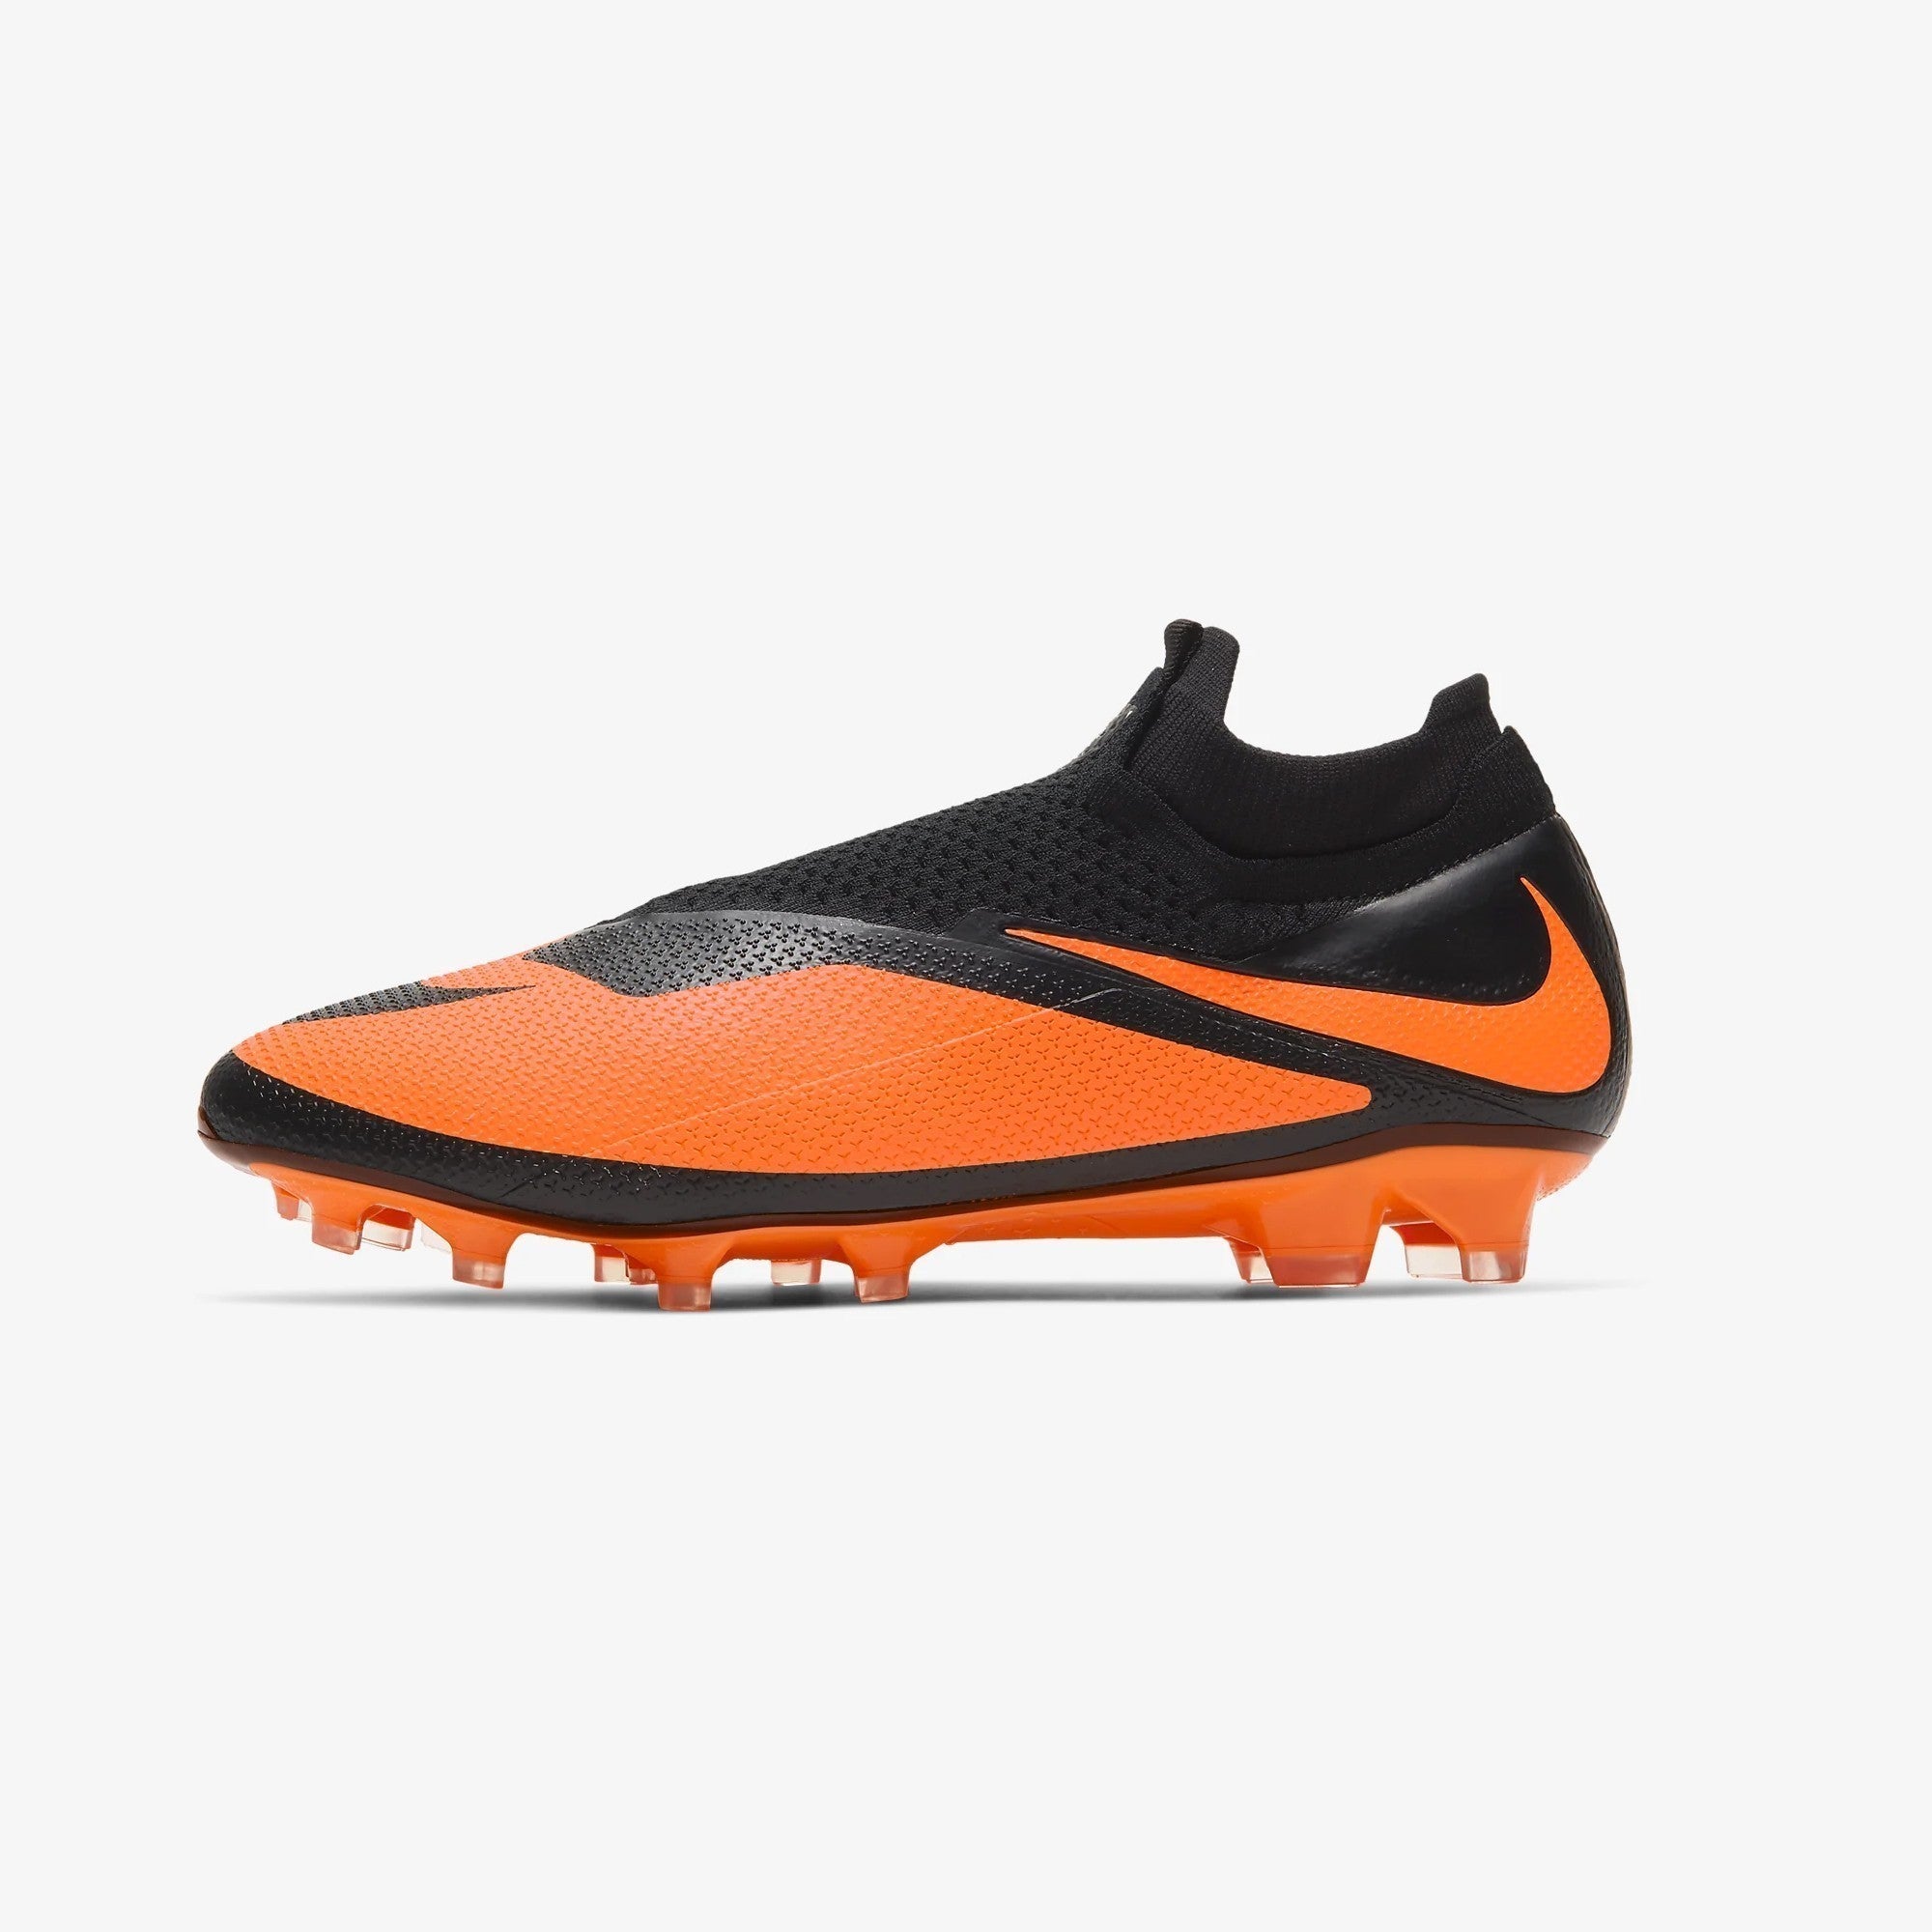 places to buy cleats near me